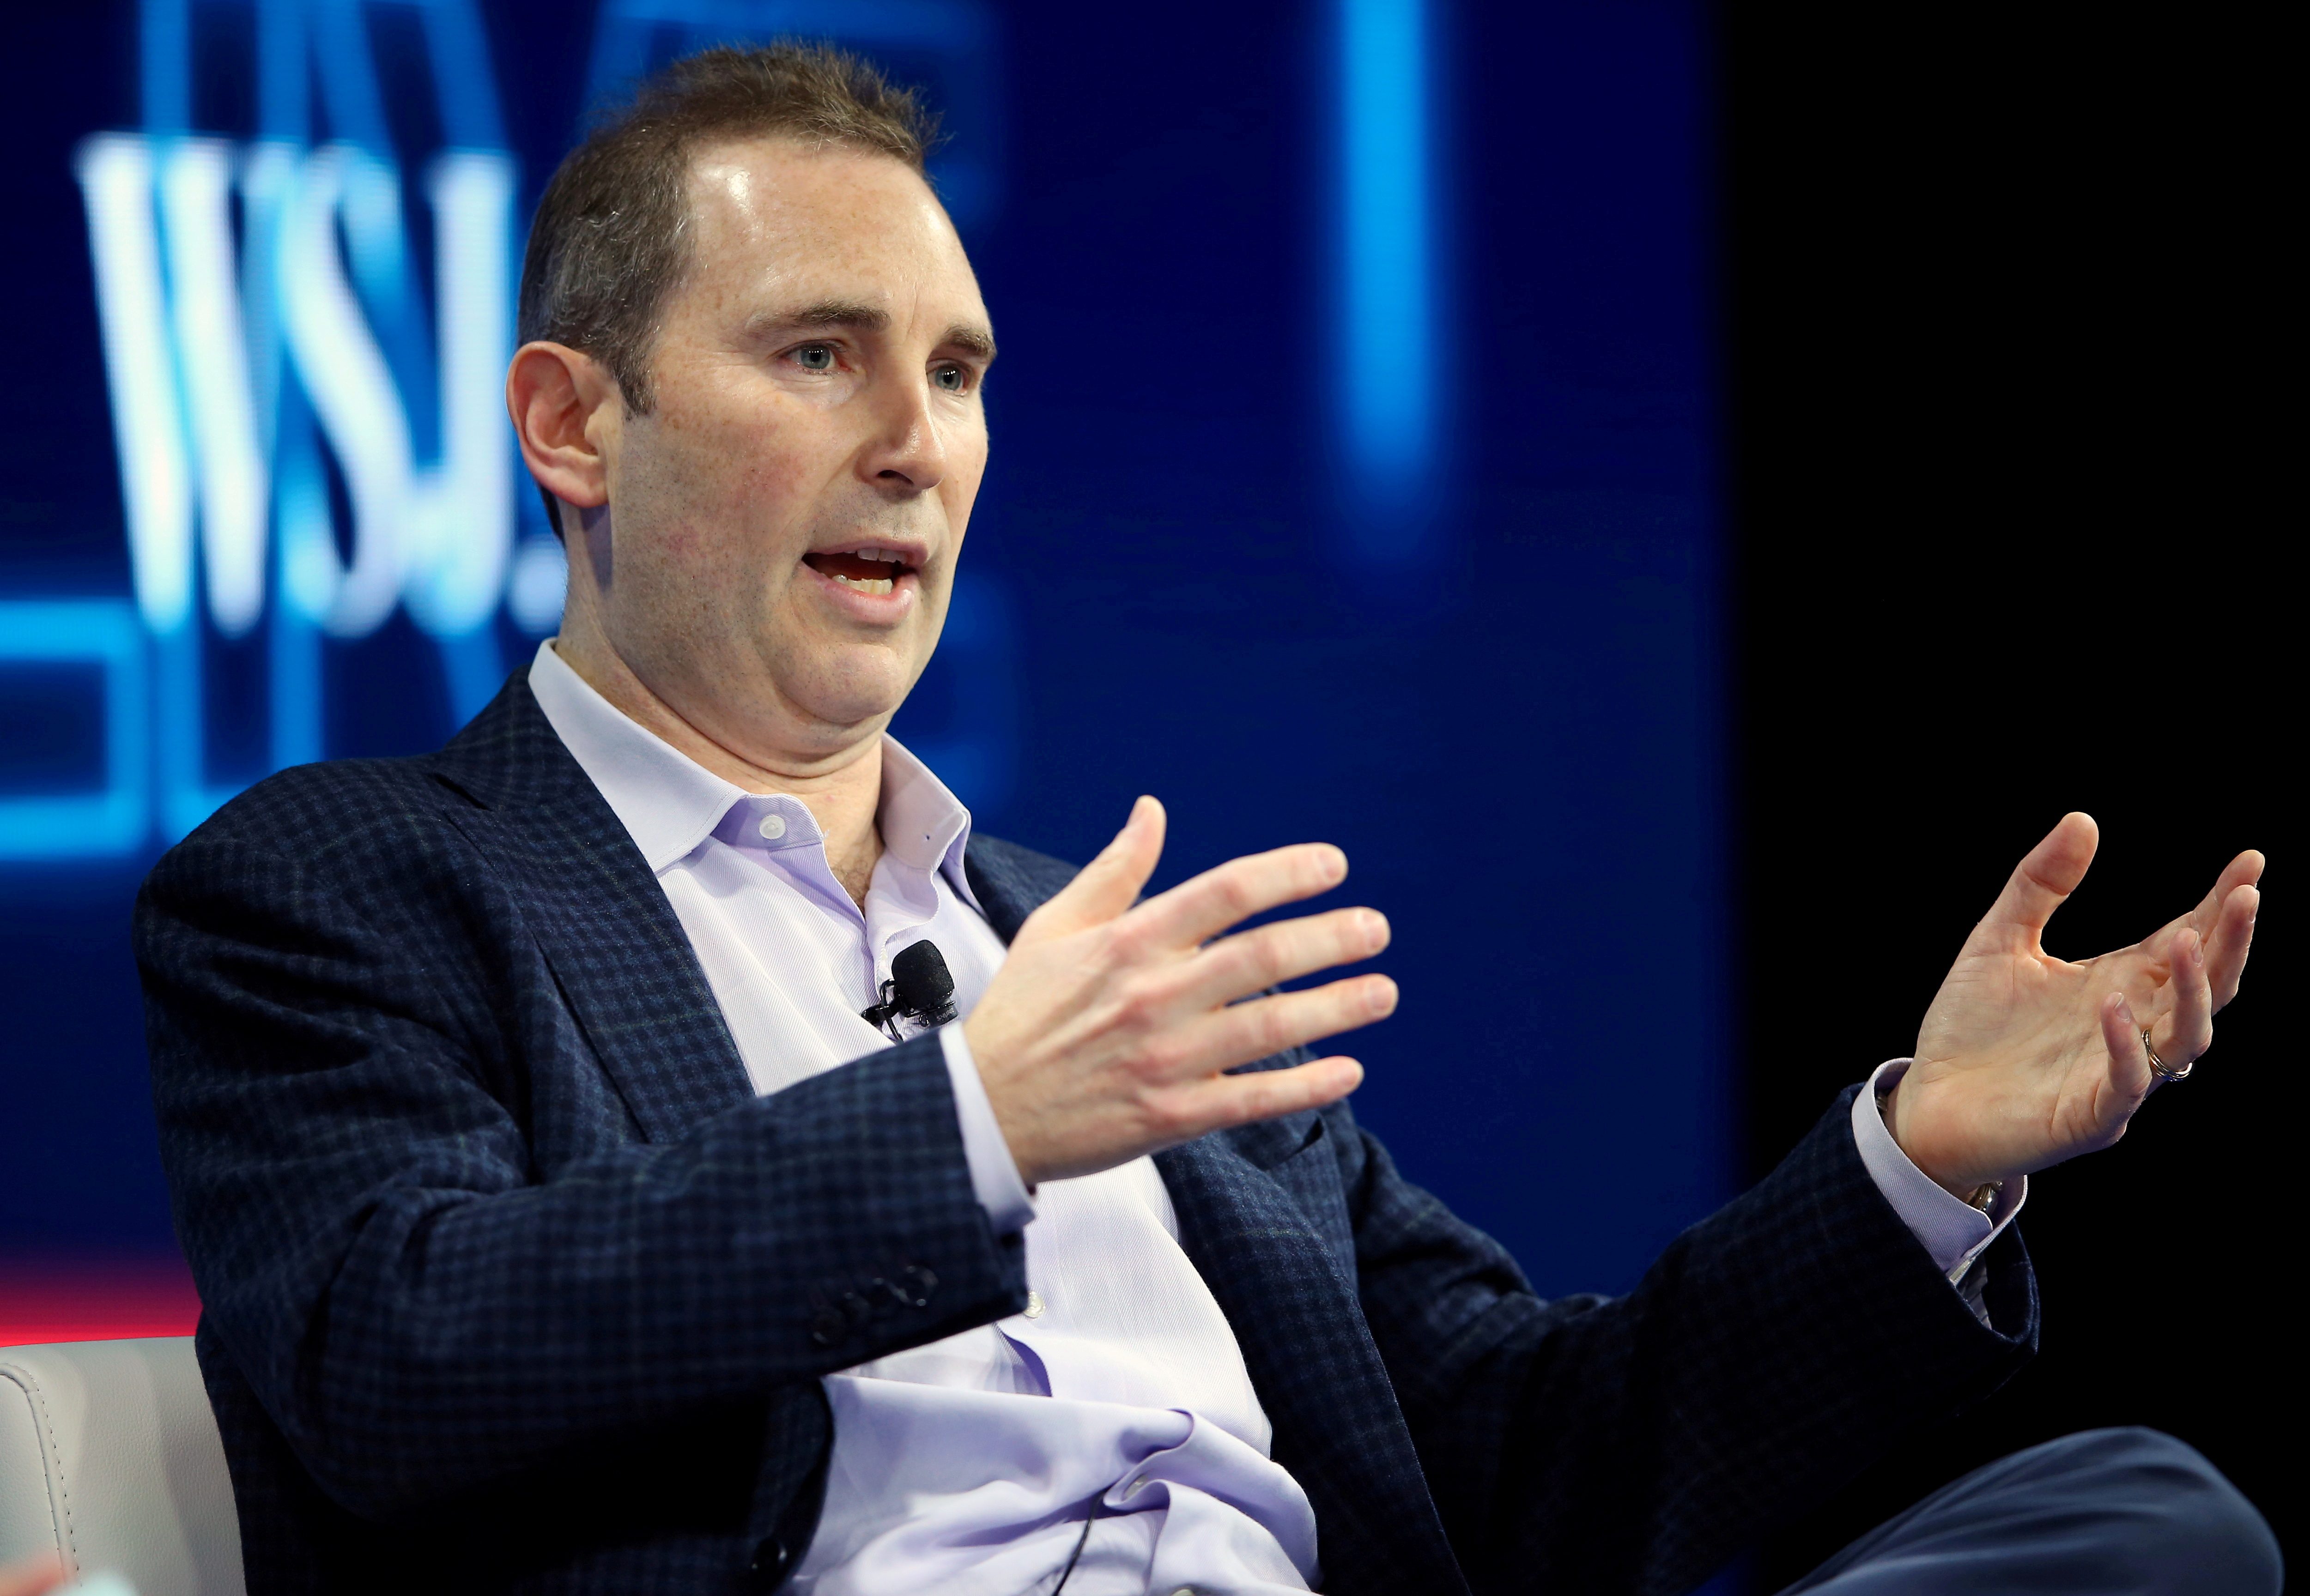 The challenges facing Amazon’s new CEO, Andy Jassy